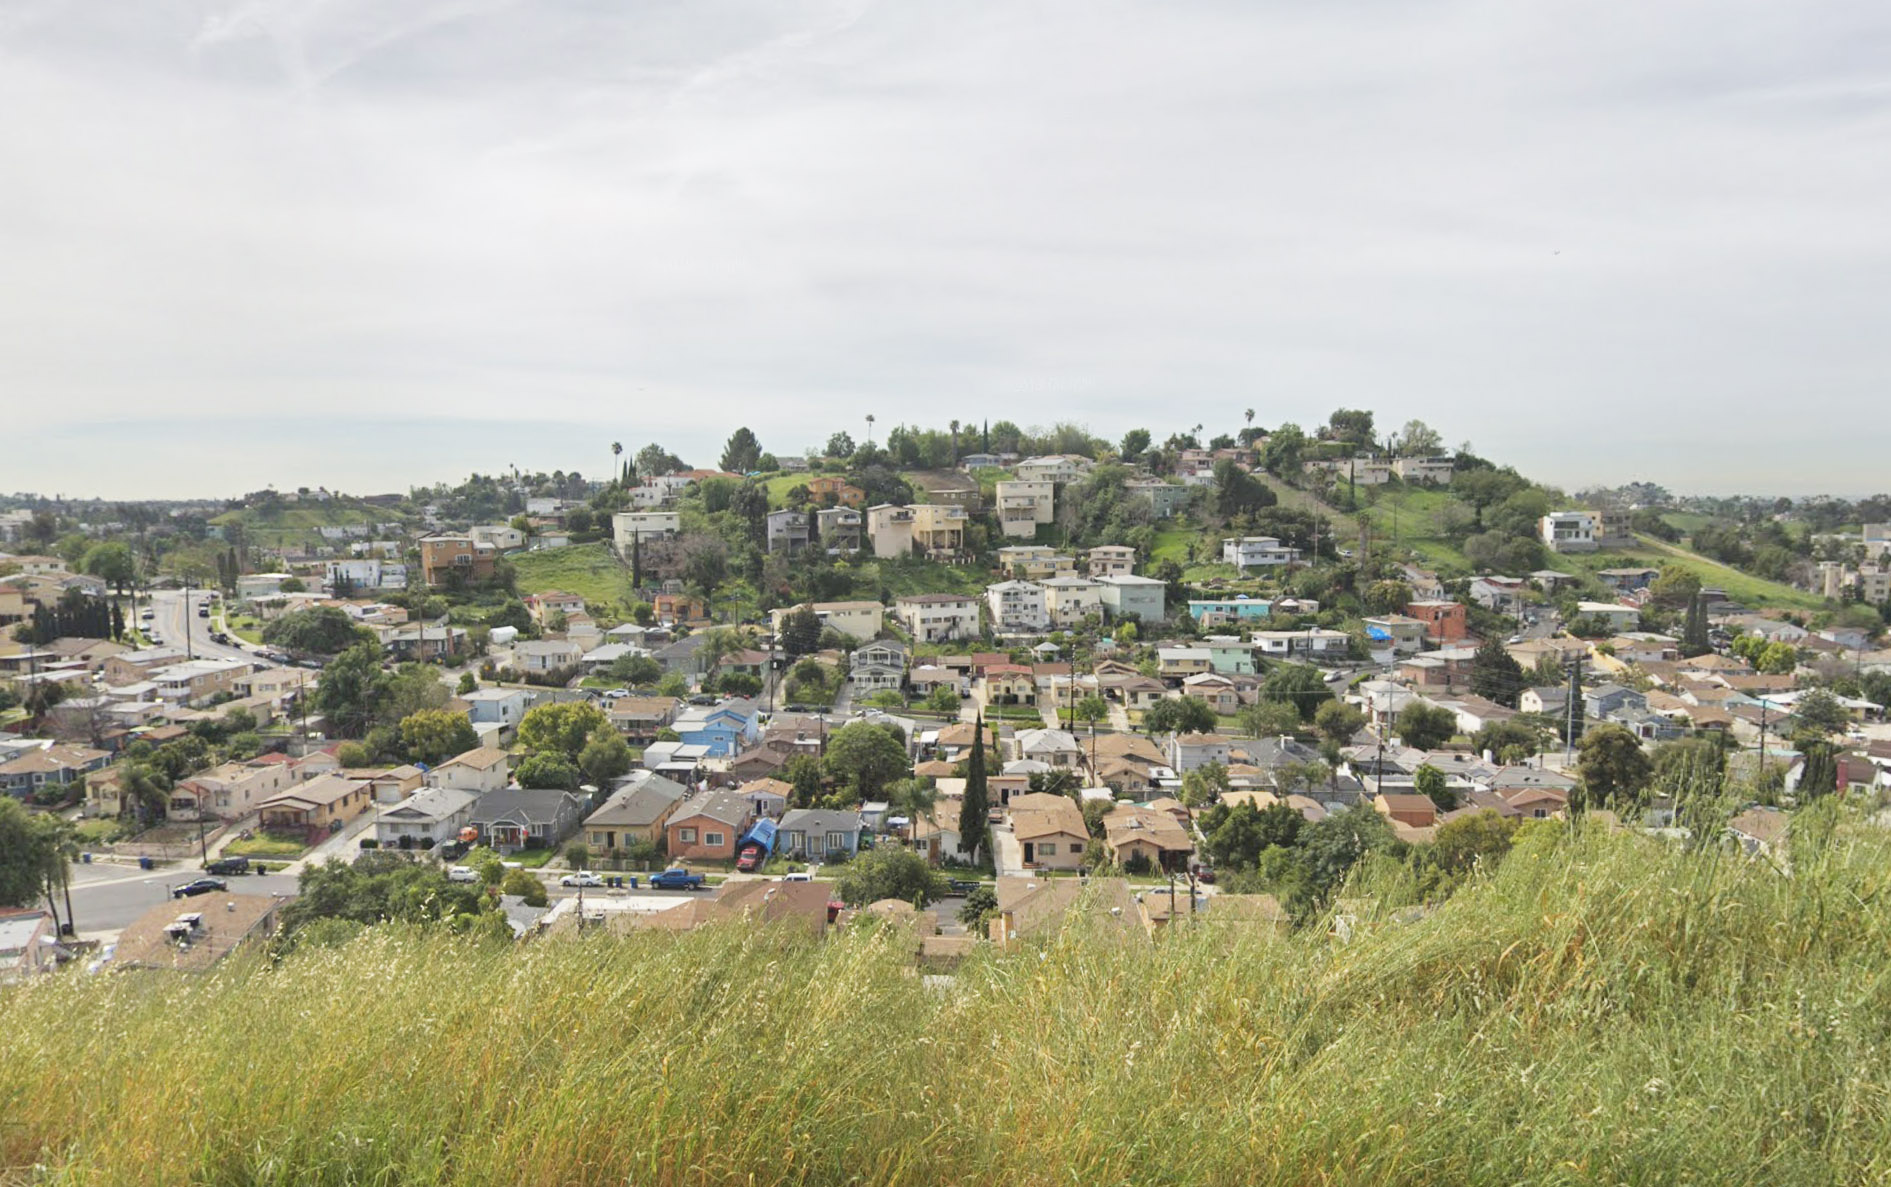 hills with several homes and streets